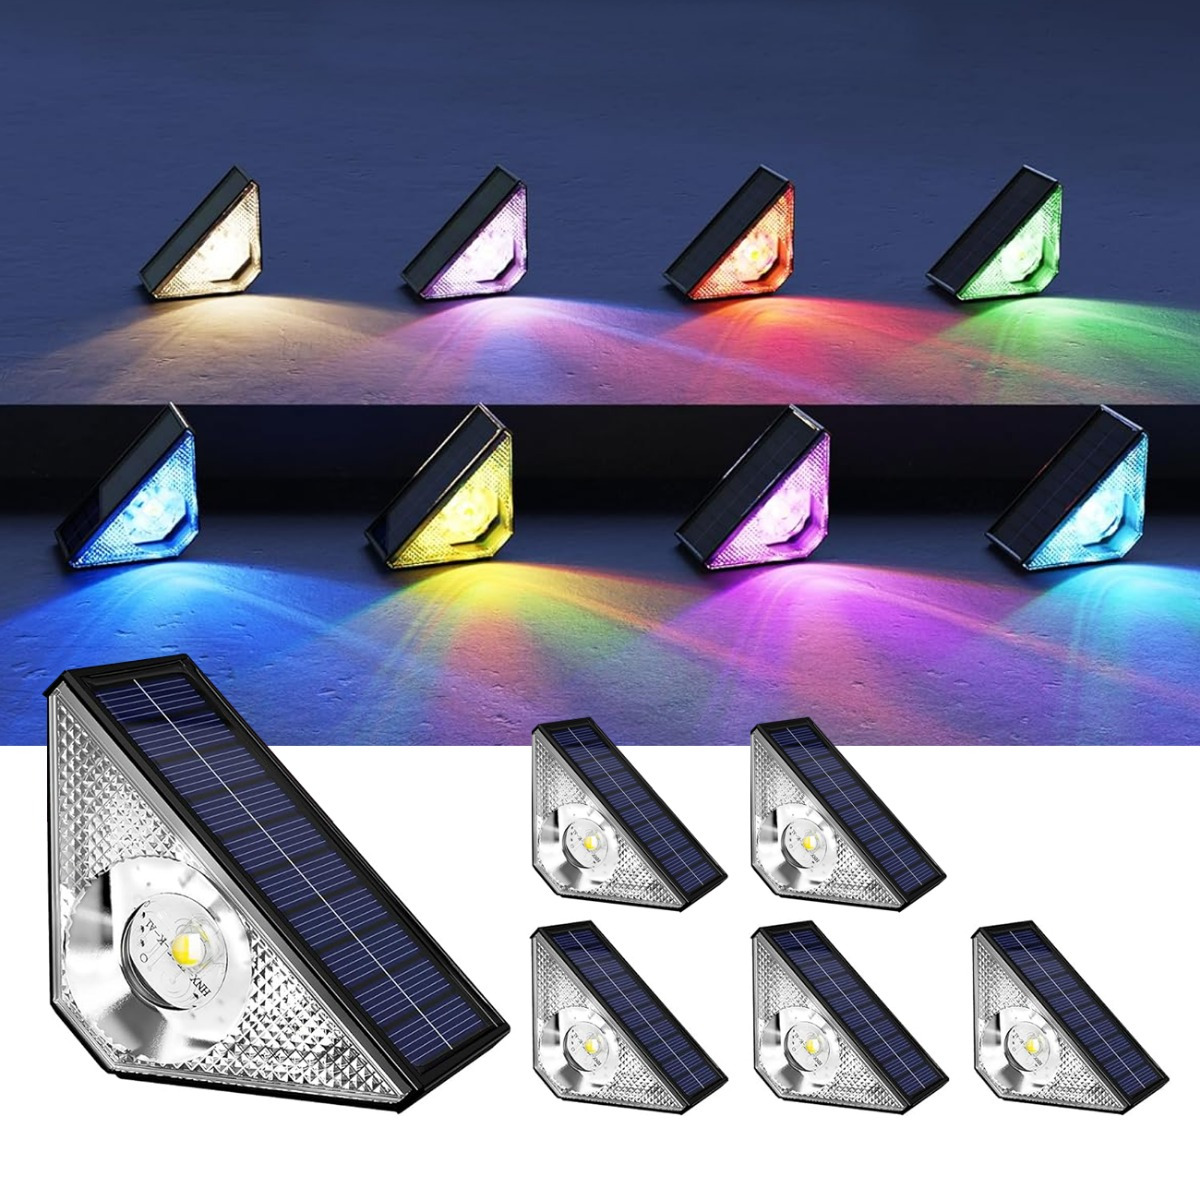 

Jackyled Solar Step Lights Waterproof, Warm And 7 Rgb Colors Deck Lights Solar Powered, Triangle-shaped Solar Stair Lights For Outside Patio Decor Porch Backyard (6 Pack)